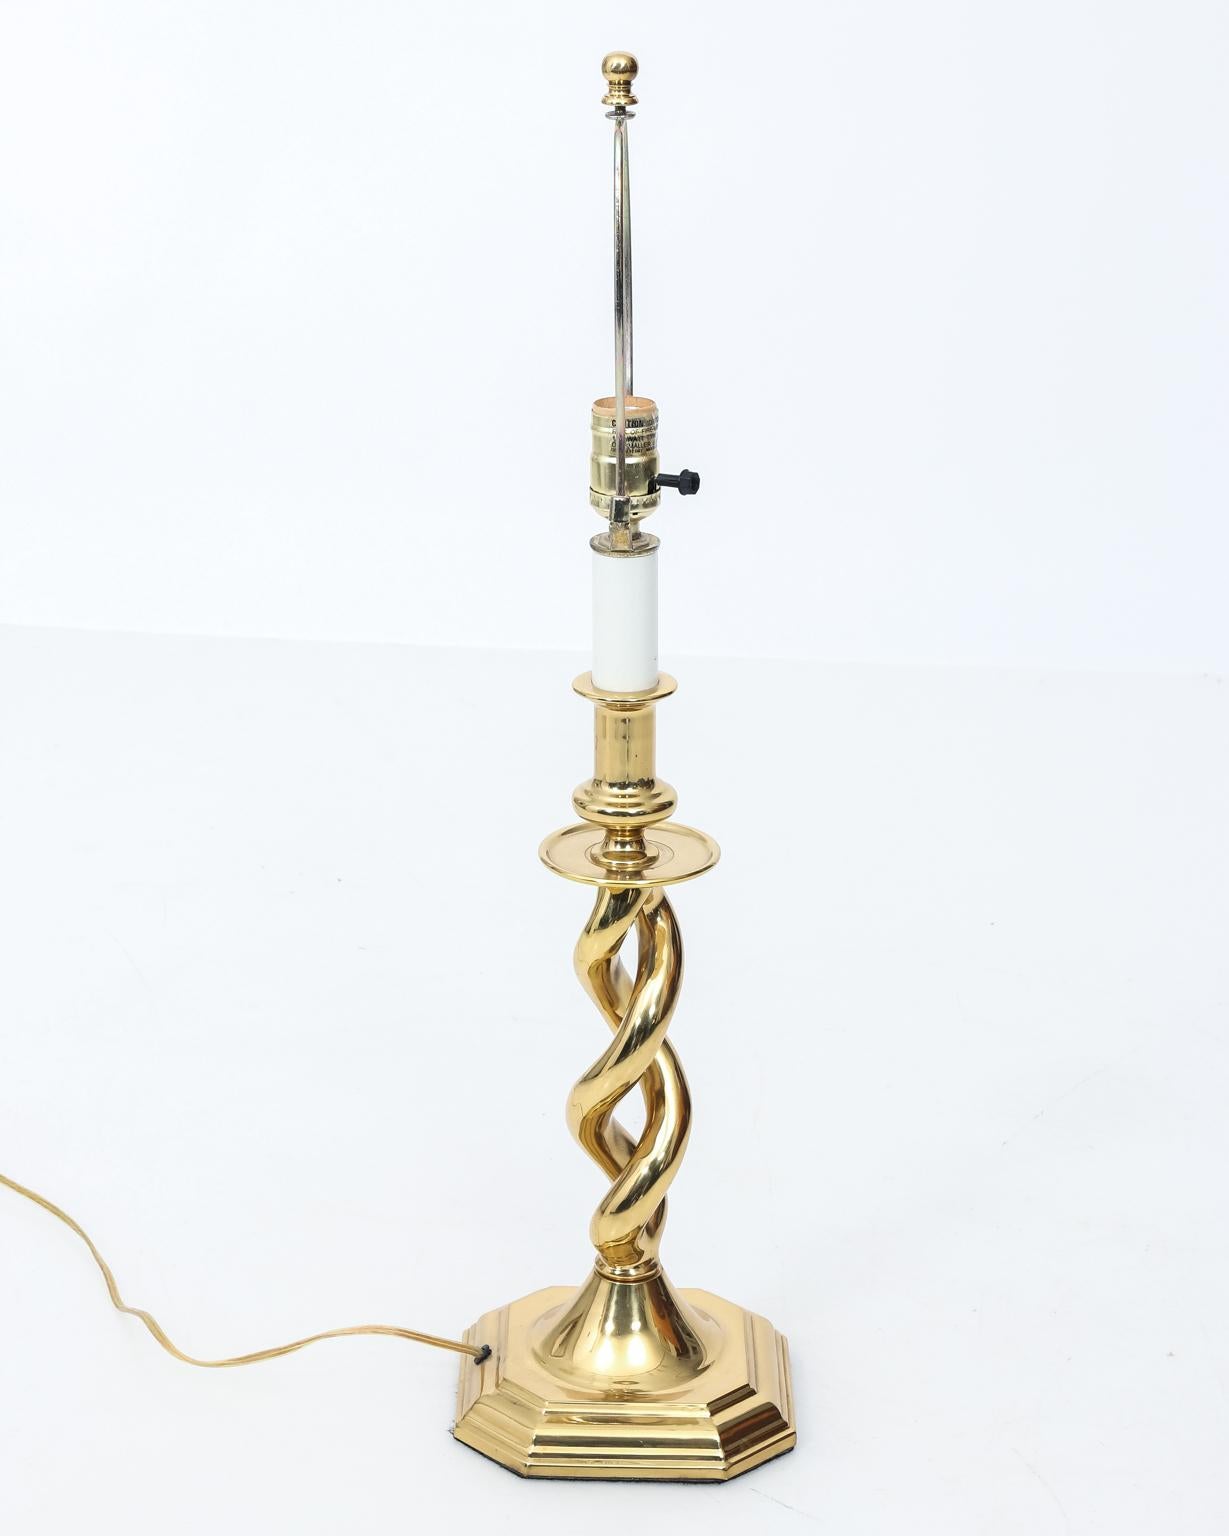 Pair Of Brass Barley Twist Table Lamps, Barley Twist Table Lamp Finish Antique Brass